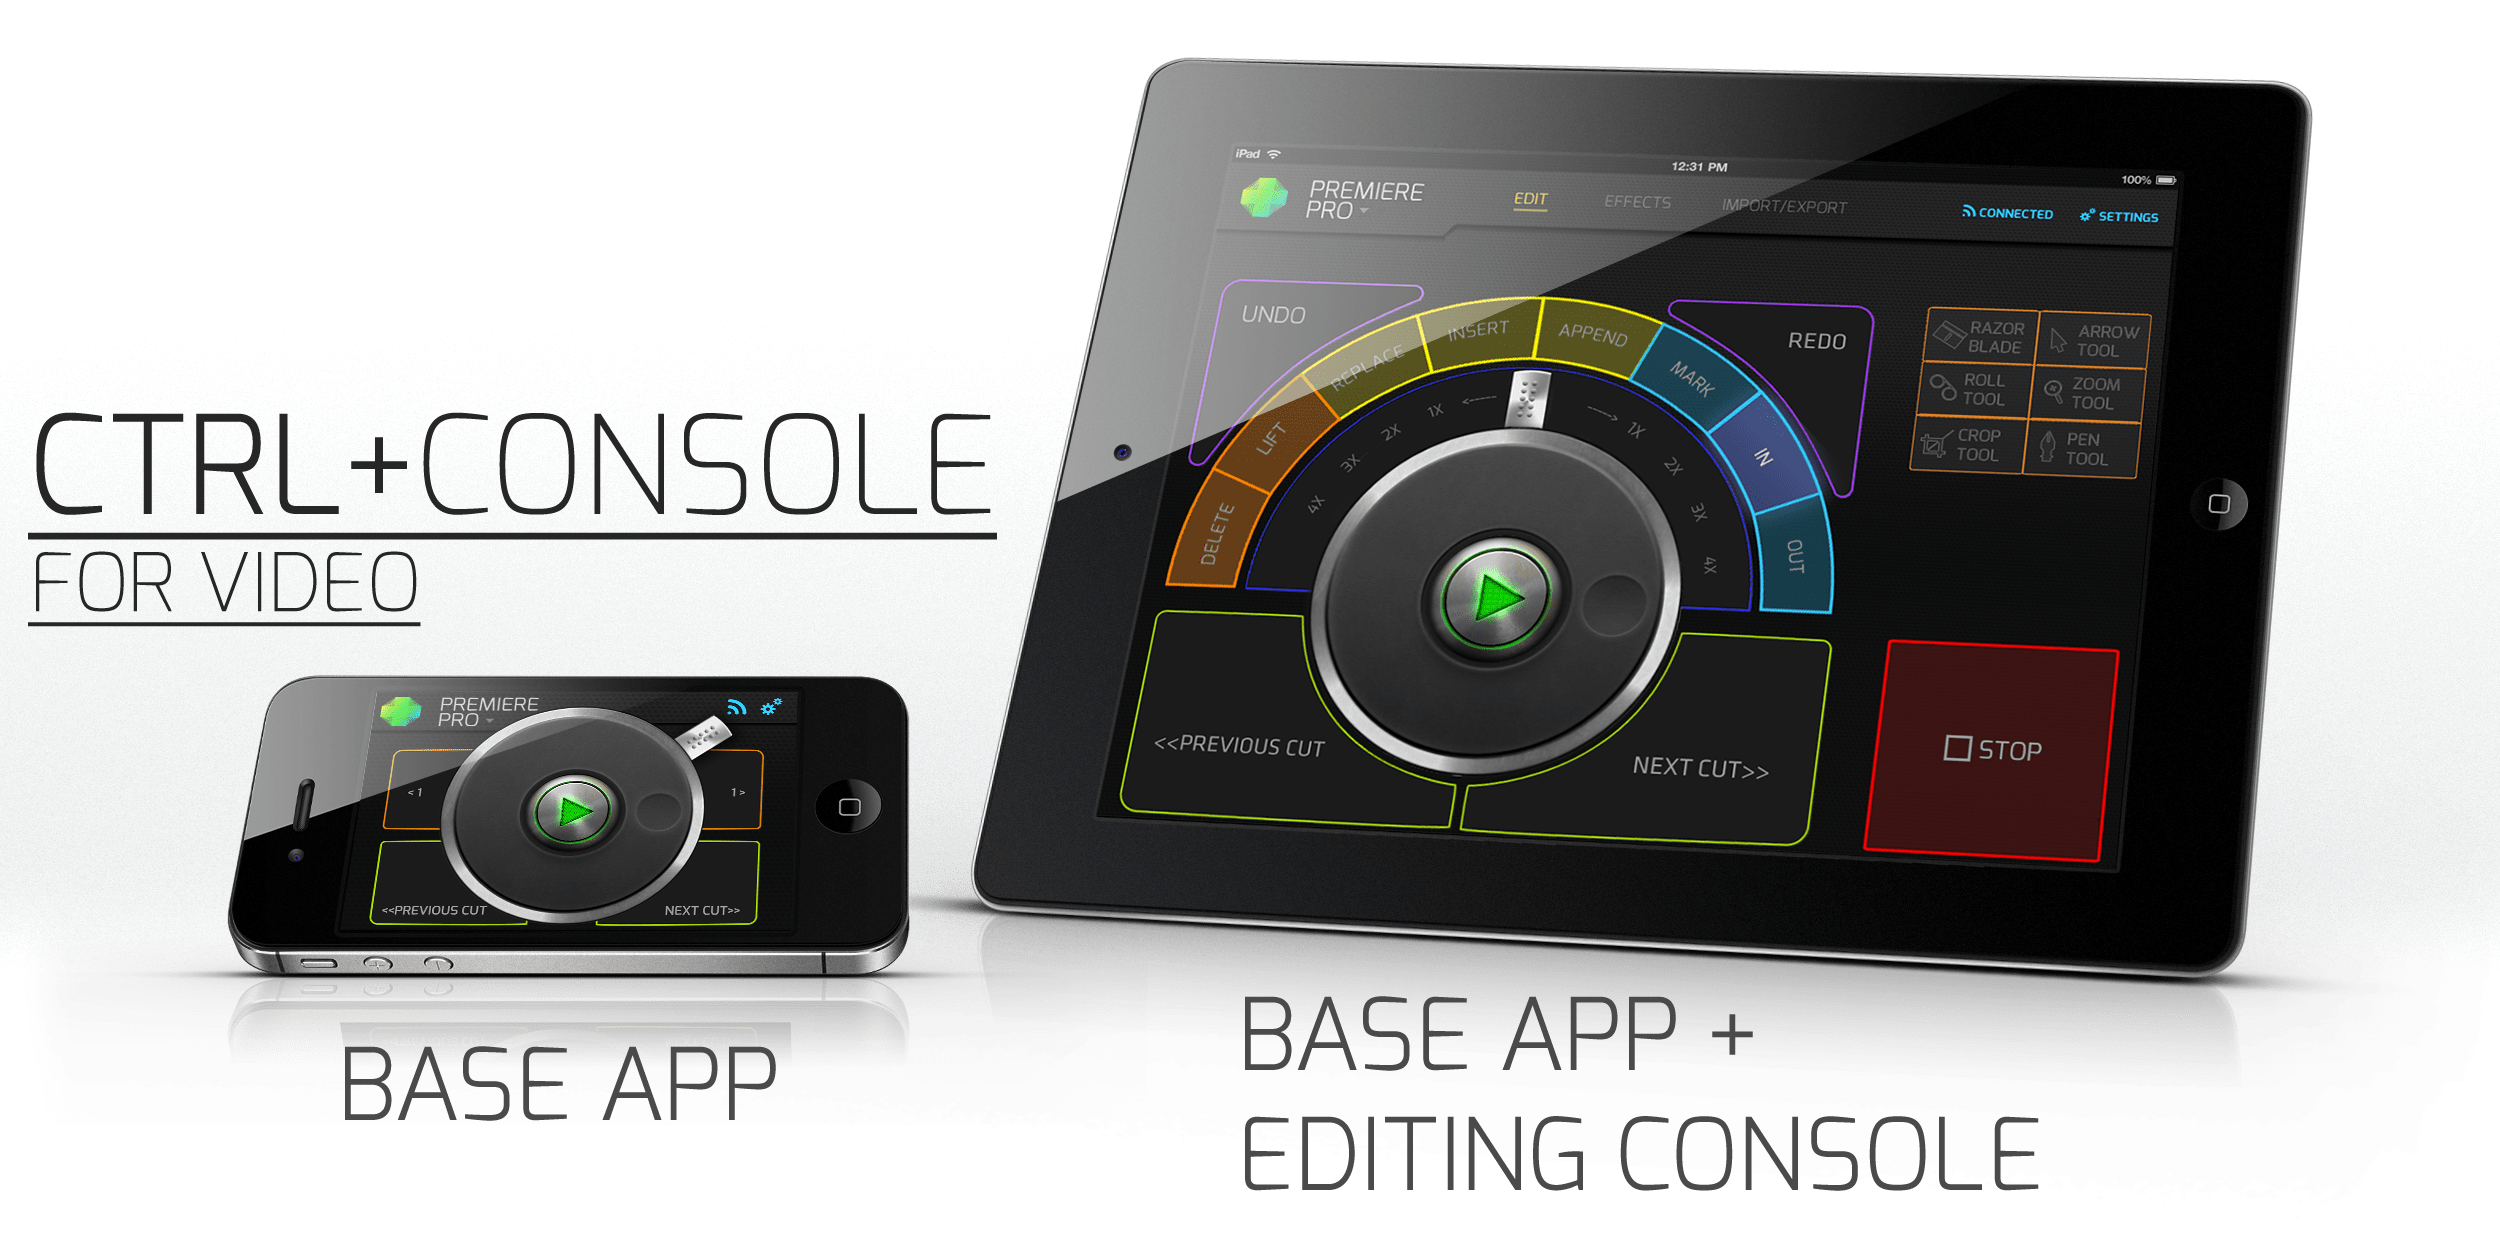 CTRL+Console lets you operate Final Cut, Premiere and Lightroom with your iPhone, iPod or iPad.